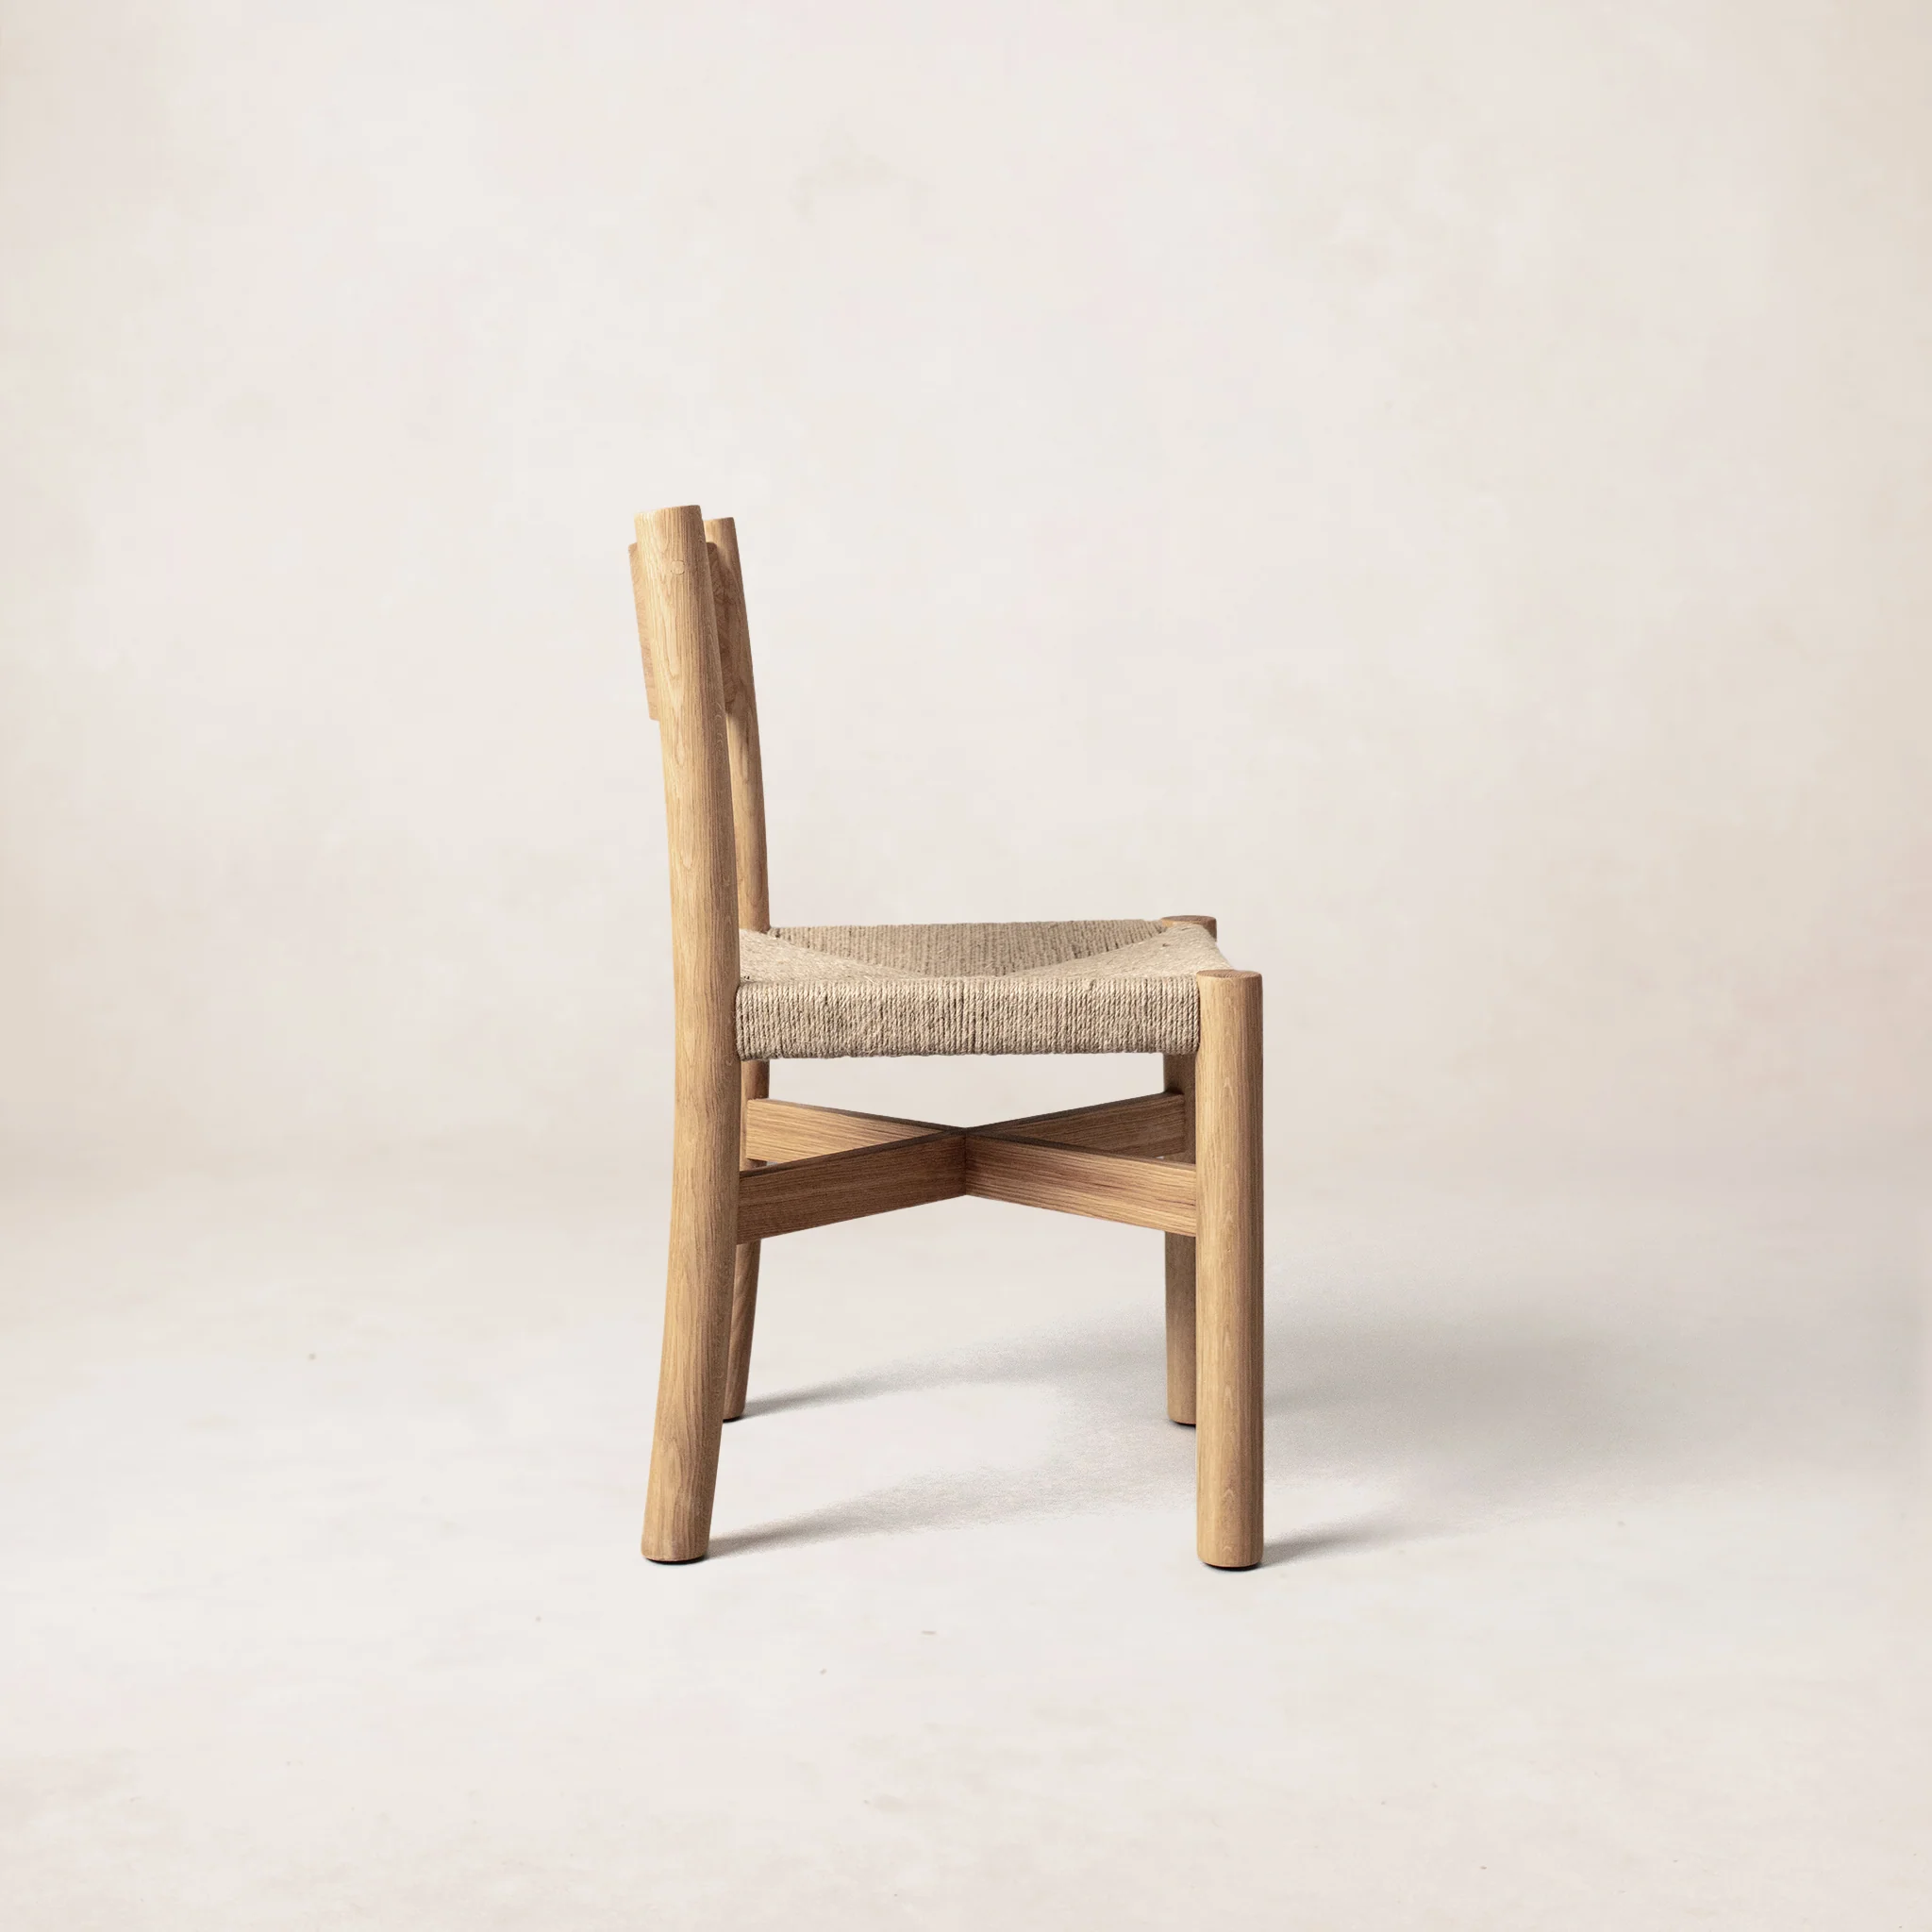 a wooden chair with a seat made of wood